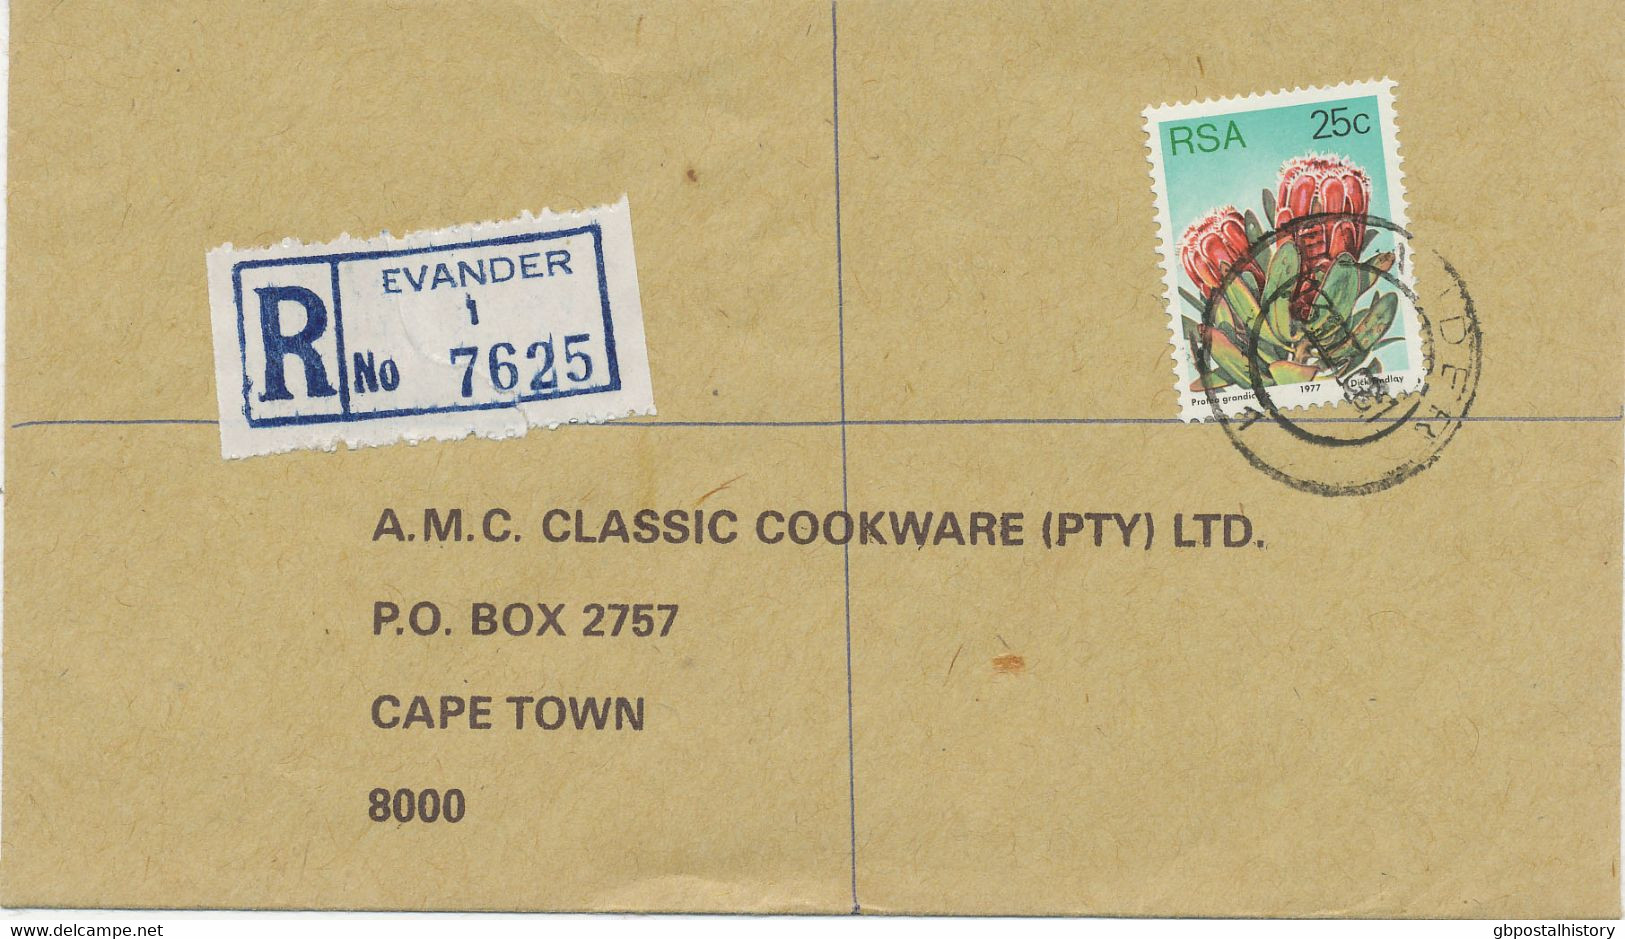 SOUTH AFRICA REGISTERED LABELS 58 R-COVERS from ASHTON to WORCESTER seventies SUPERB LOT!!!!